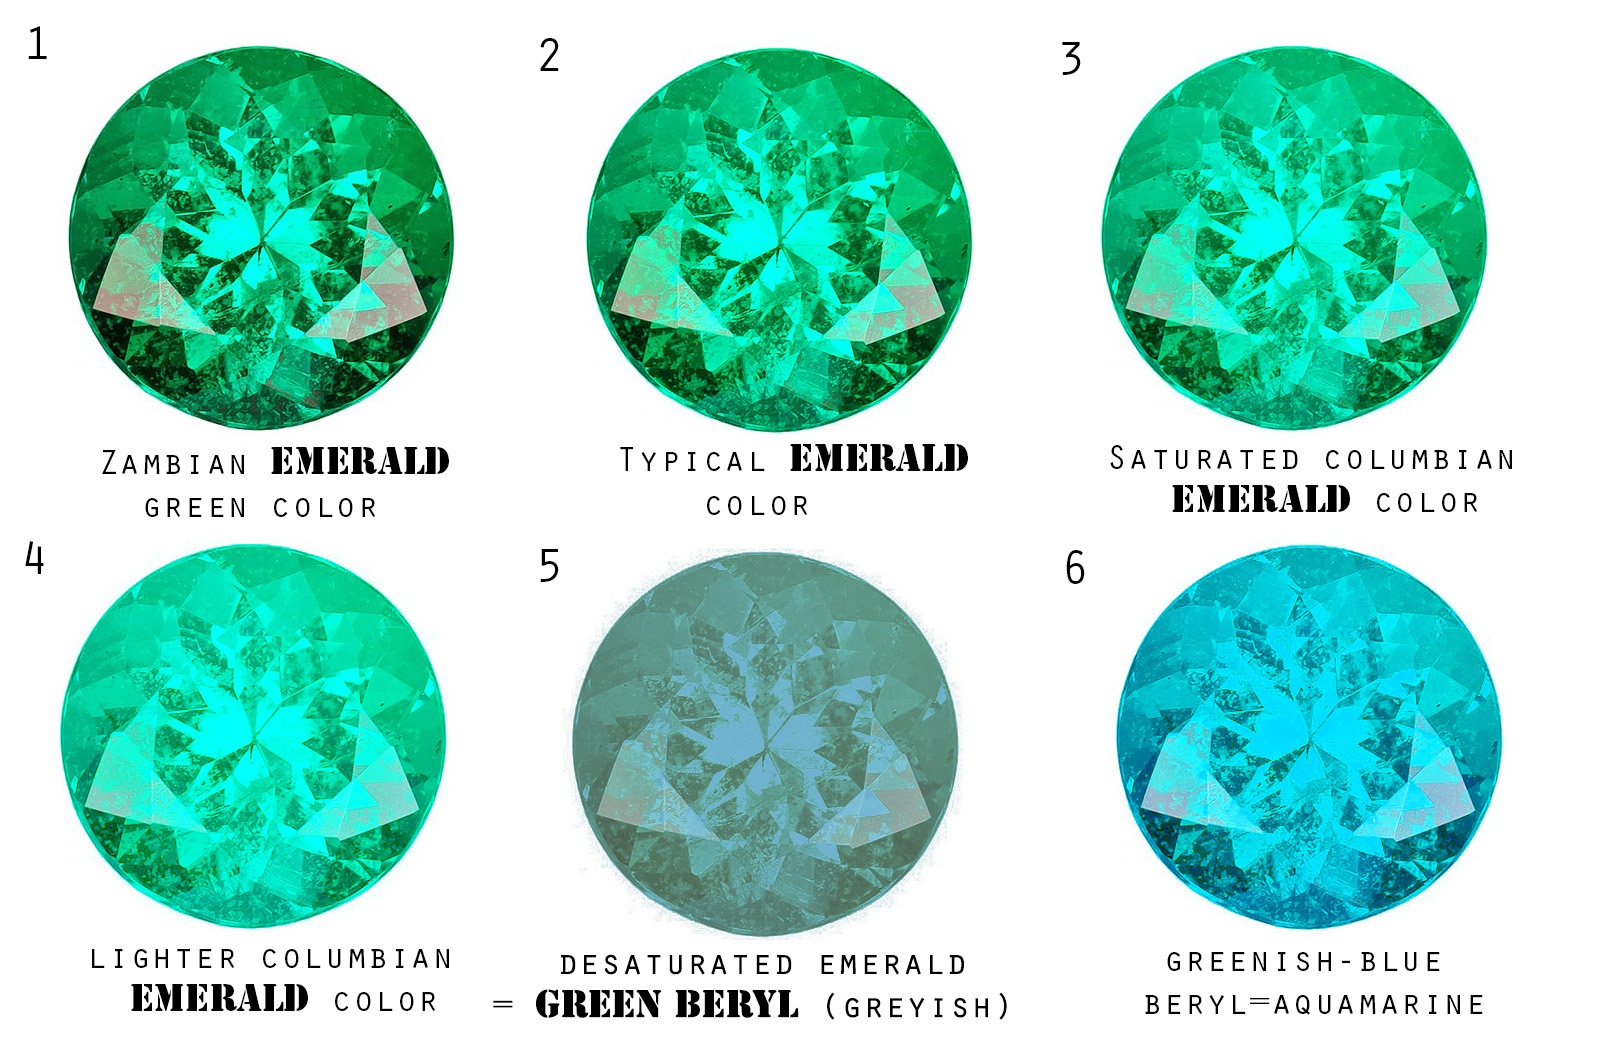 Precious stones VS. semi precious stones: what are the differences between  the two?